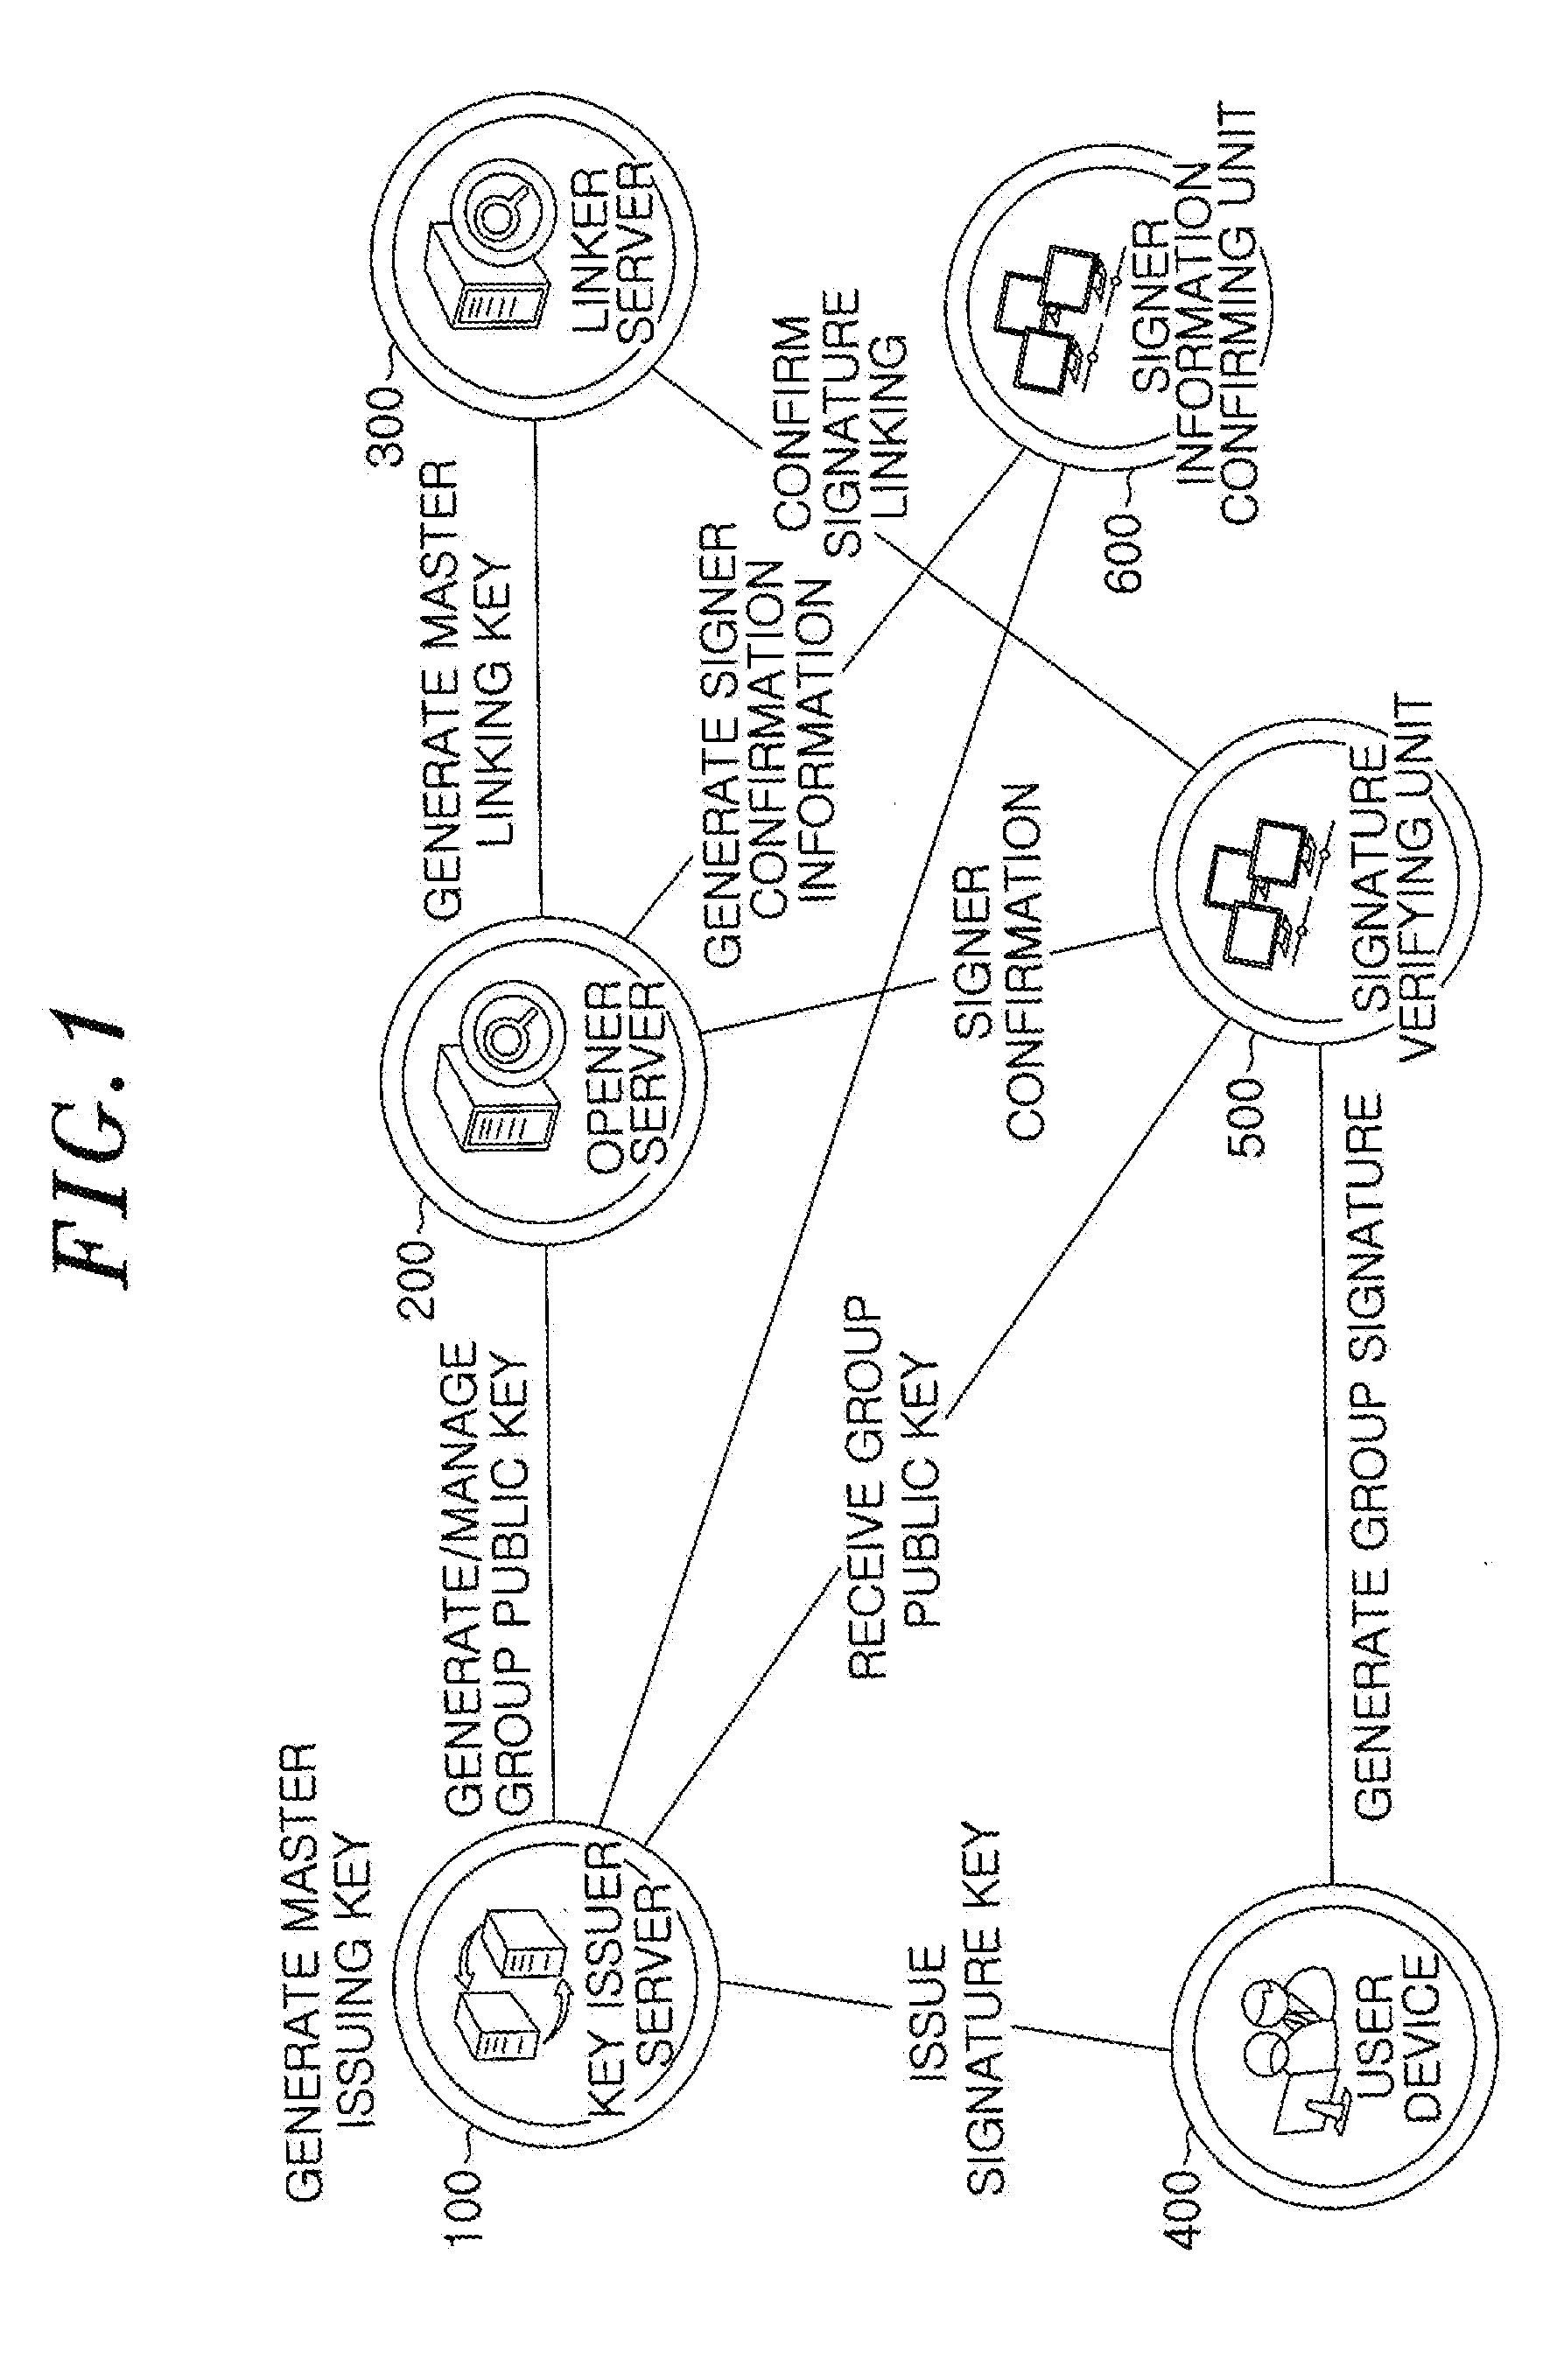 Group signature system and method providing controllable linkability